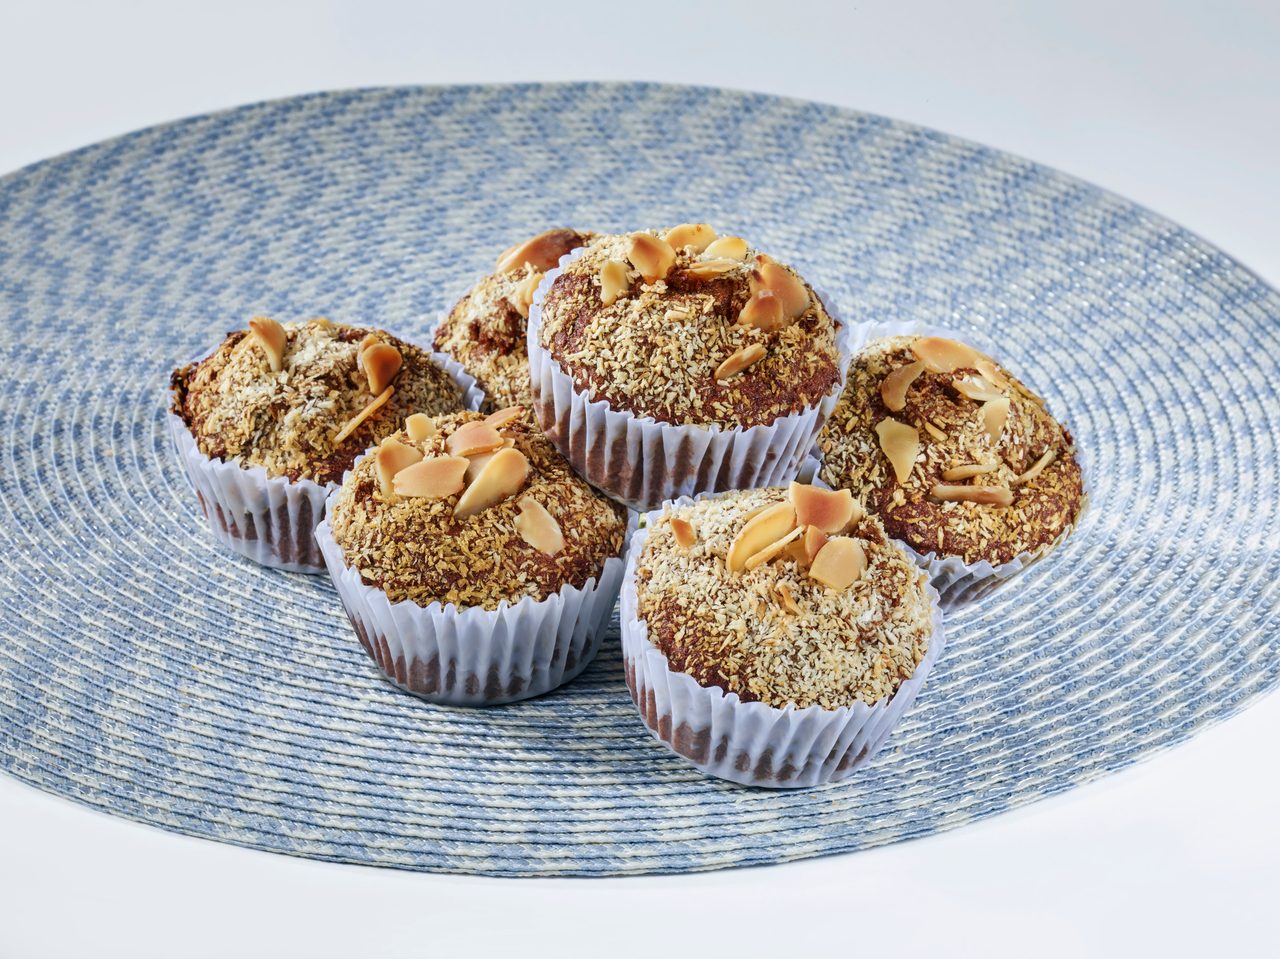 Baking cup, Baked goods, Food, Muffins, Recipe, Placemat, Cupcake